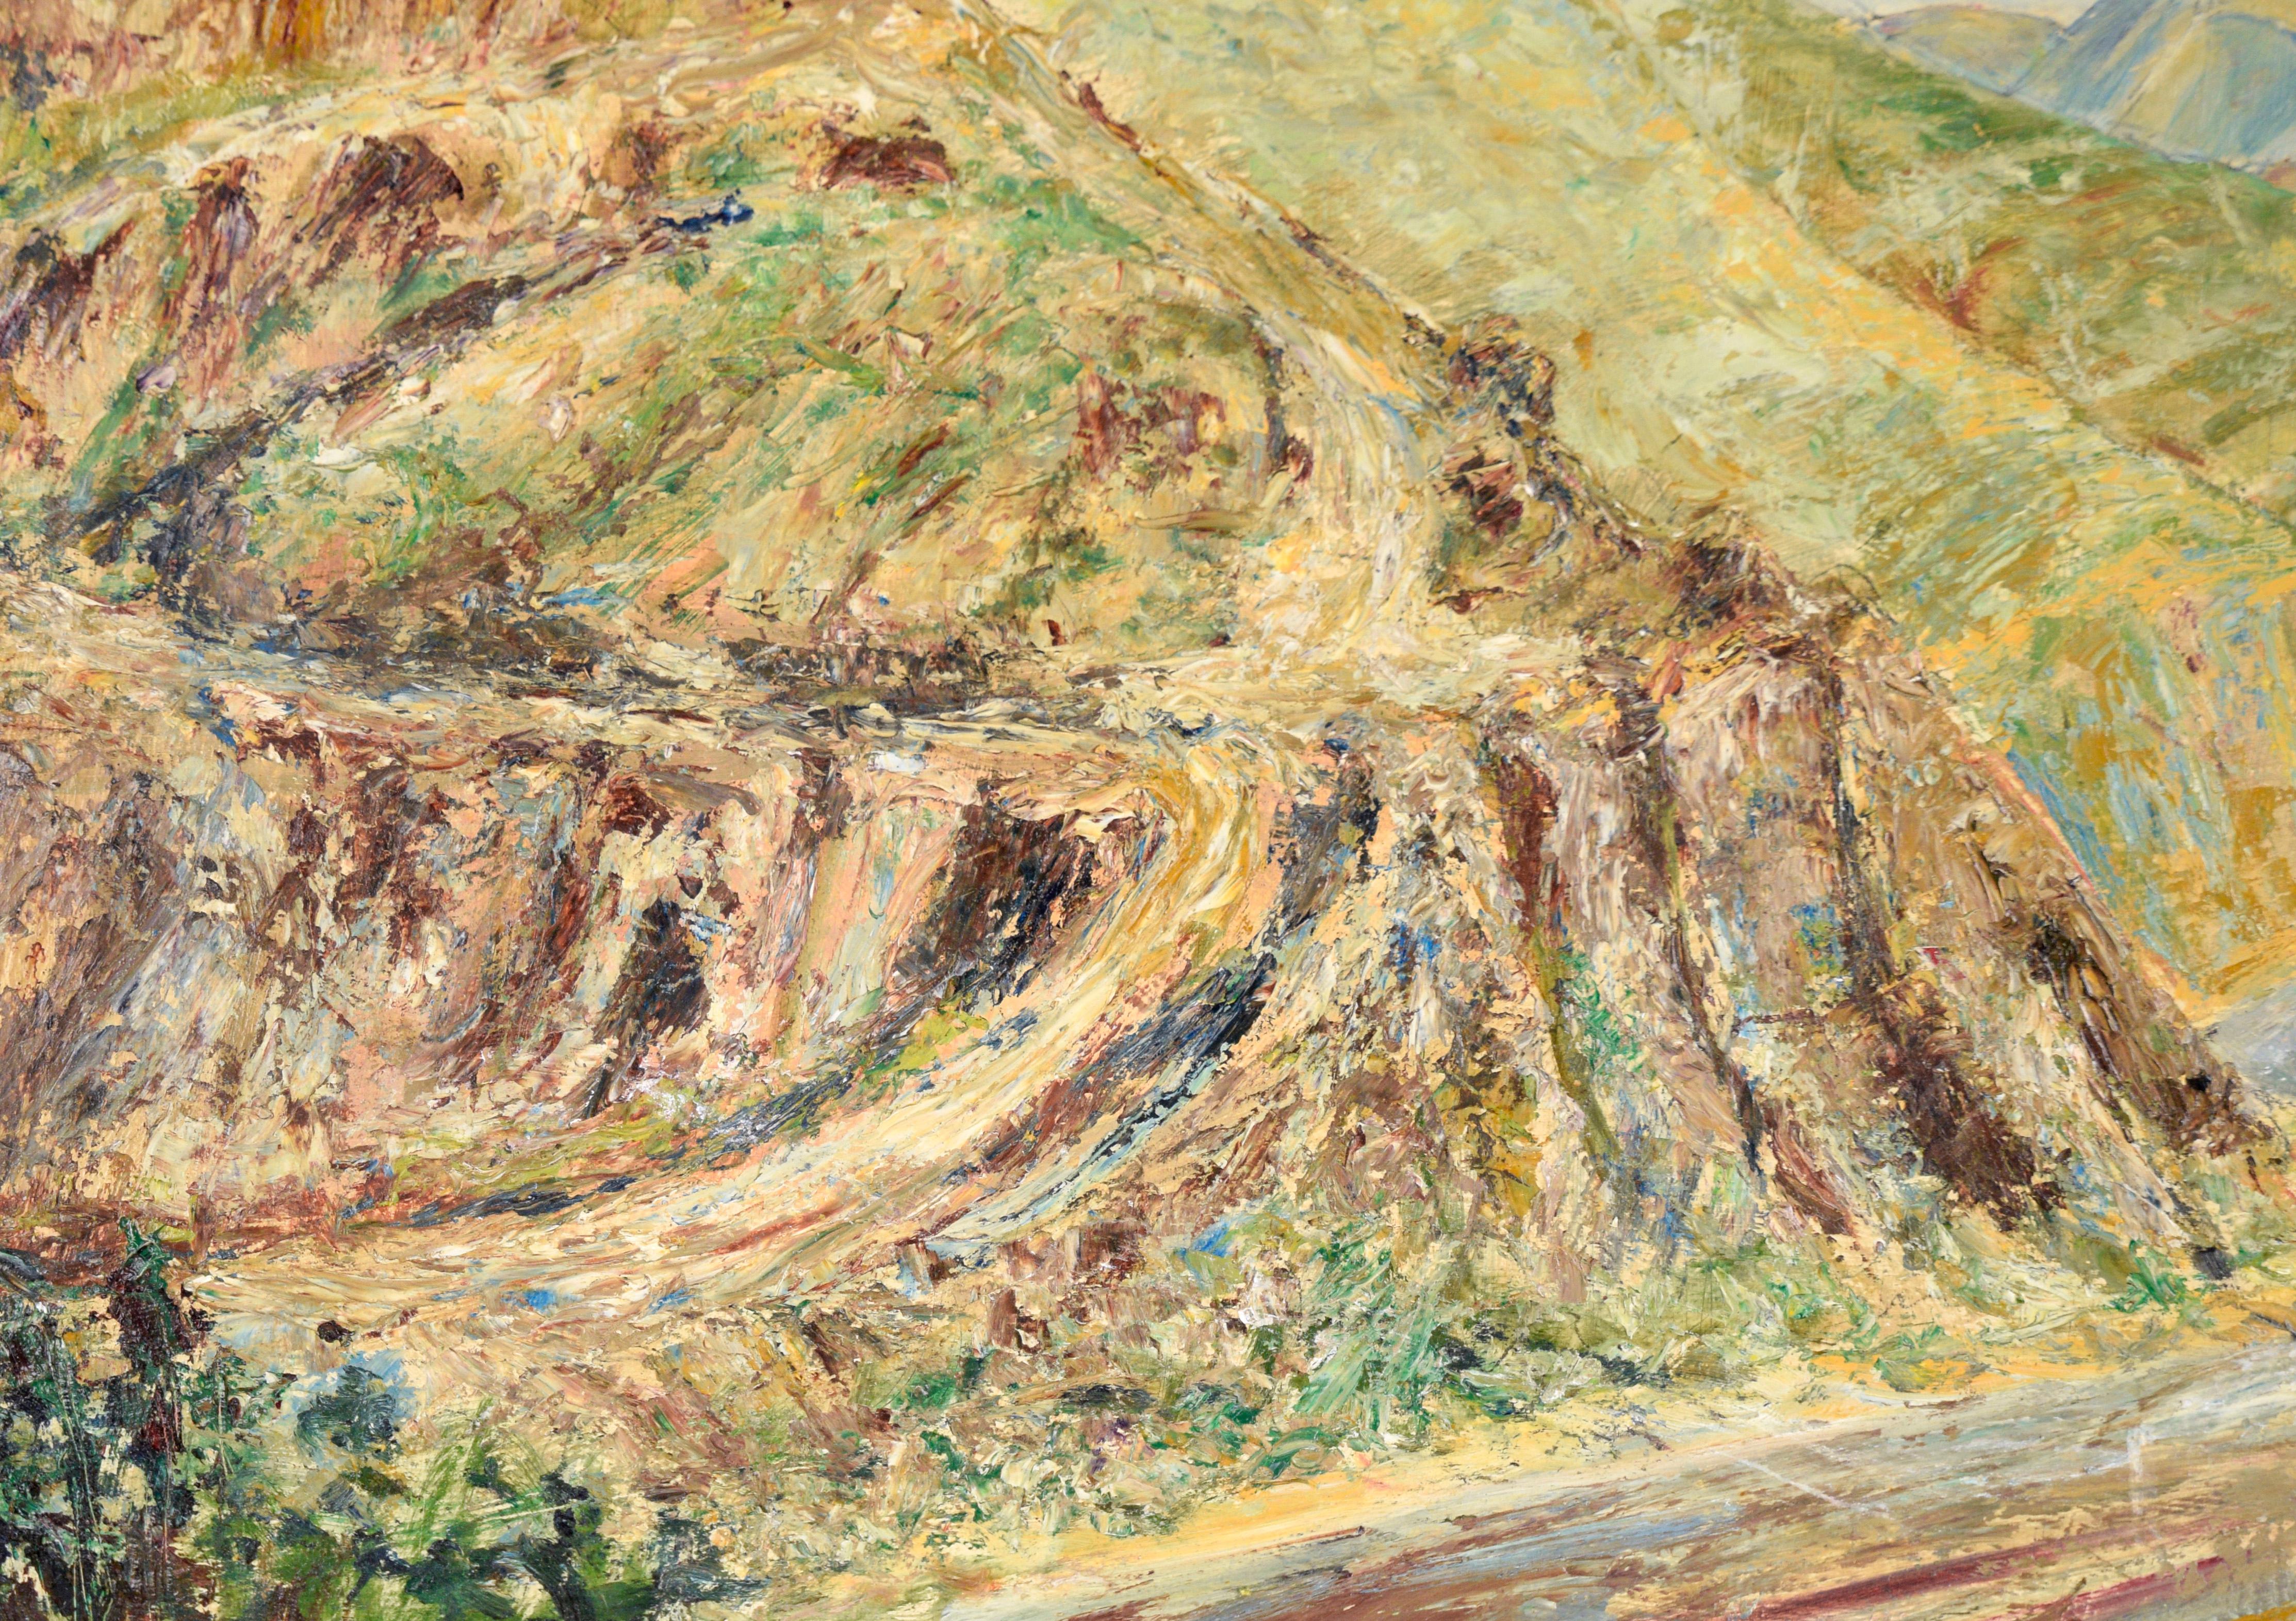 Mountain Road Landscape in Oil on Masonite - American Impressionist Painting by Artemis Wilhelm